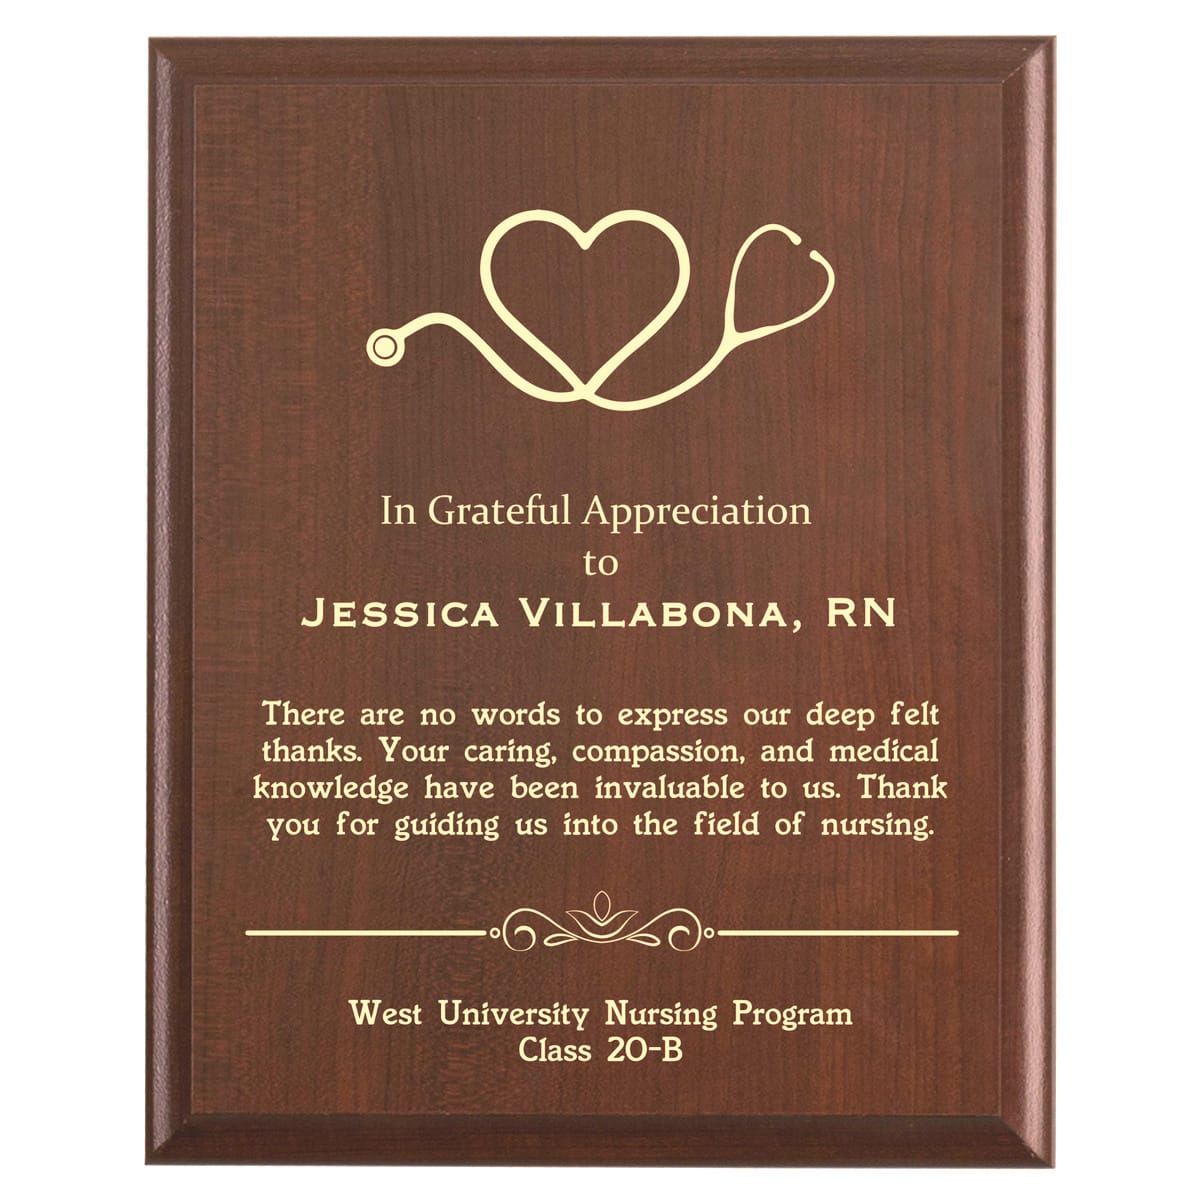 Plaque photo: Nurse Preceptor Thank You Plaque design with free personalization. Wood style finish with customized text.